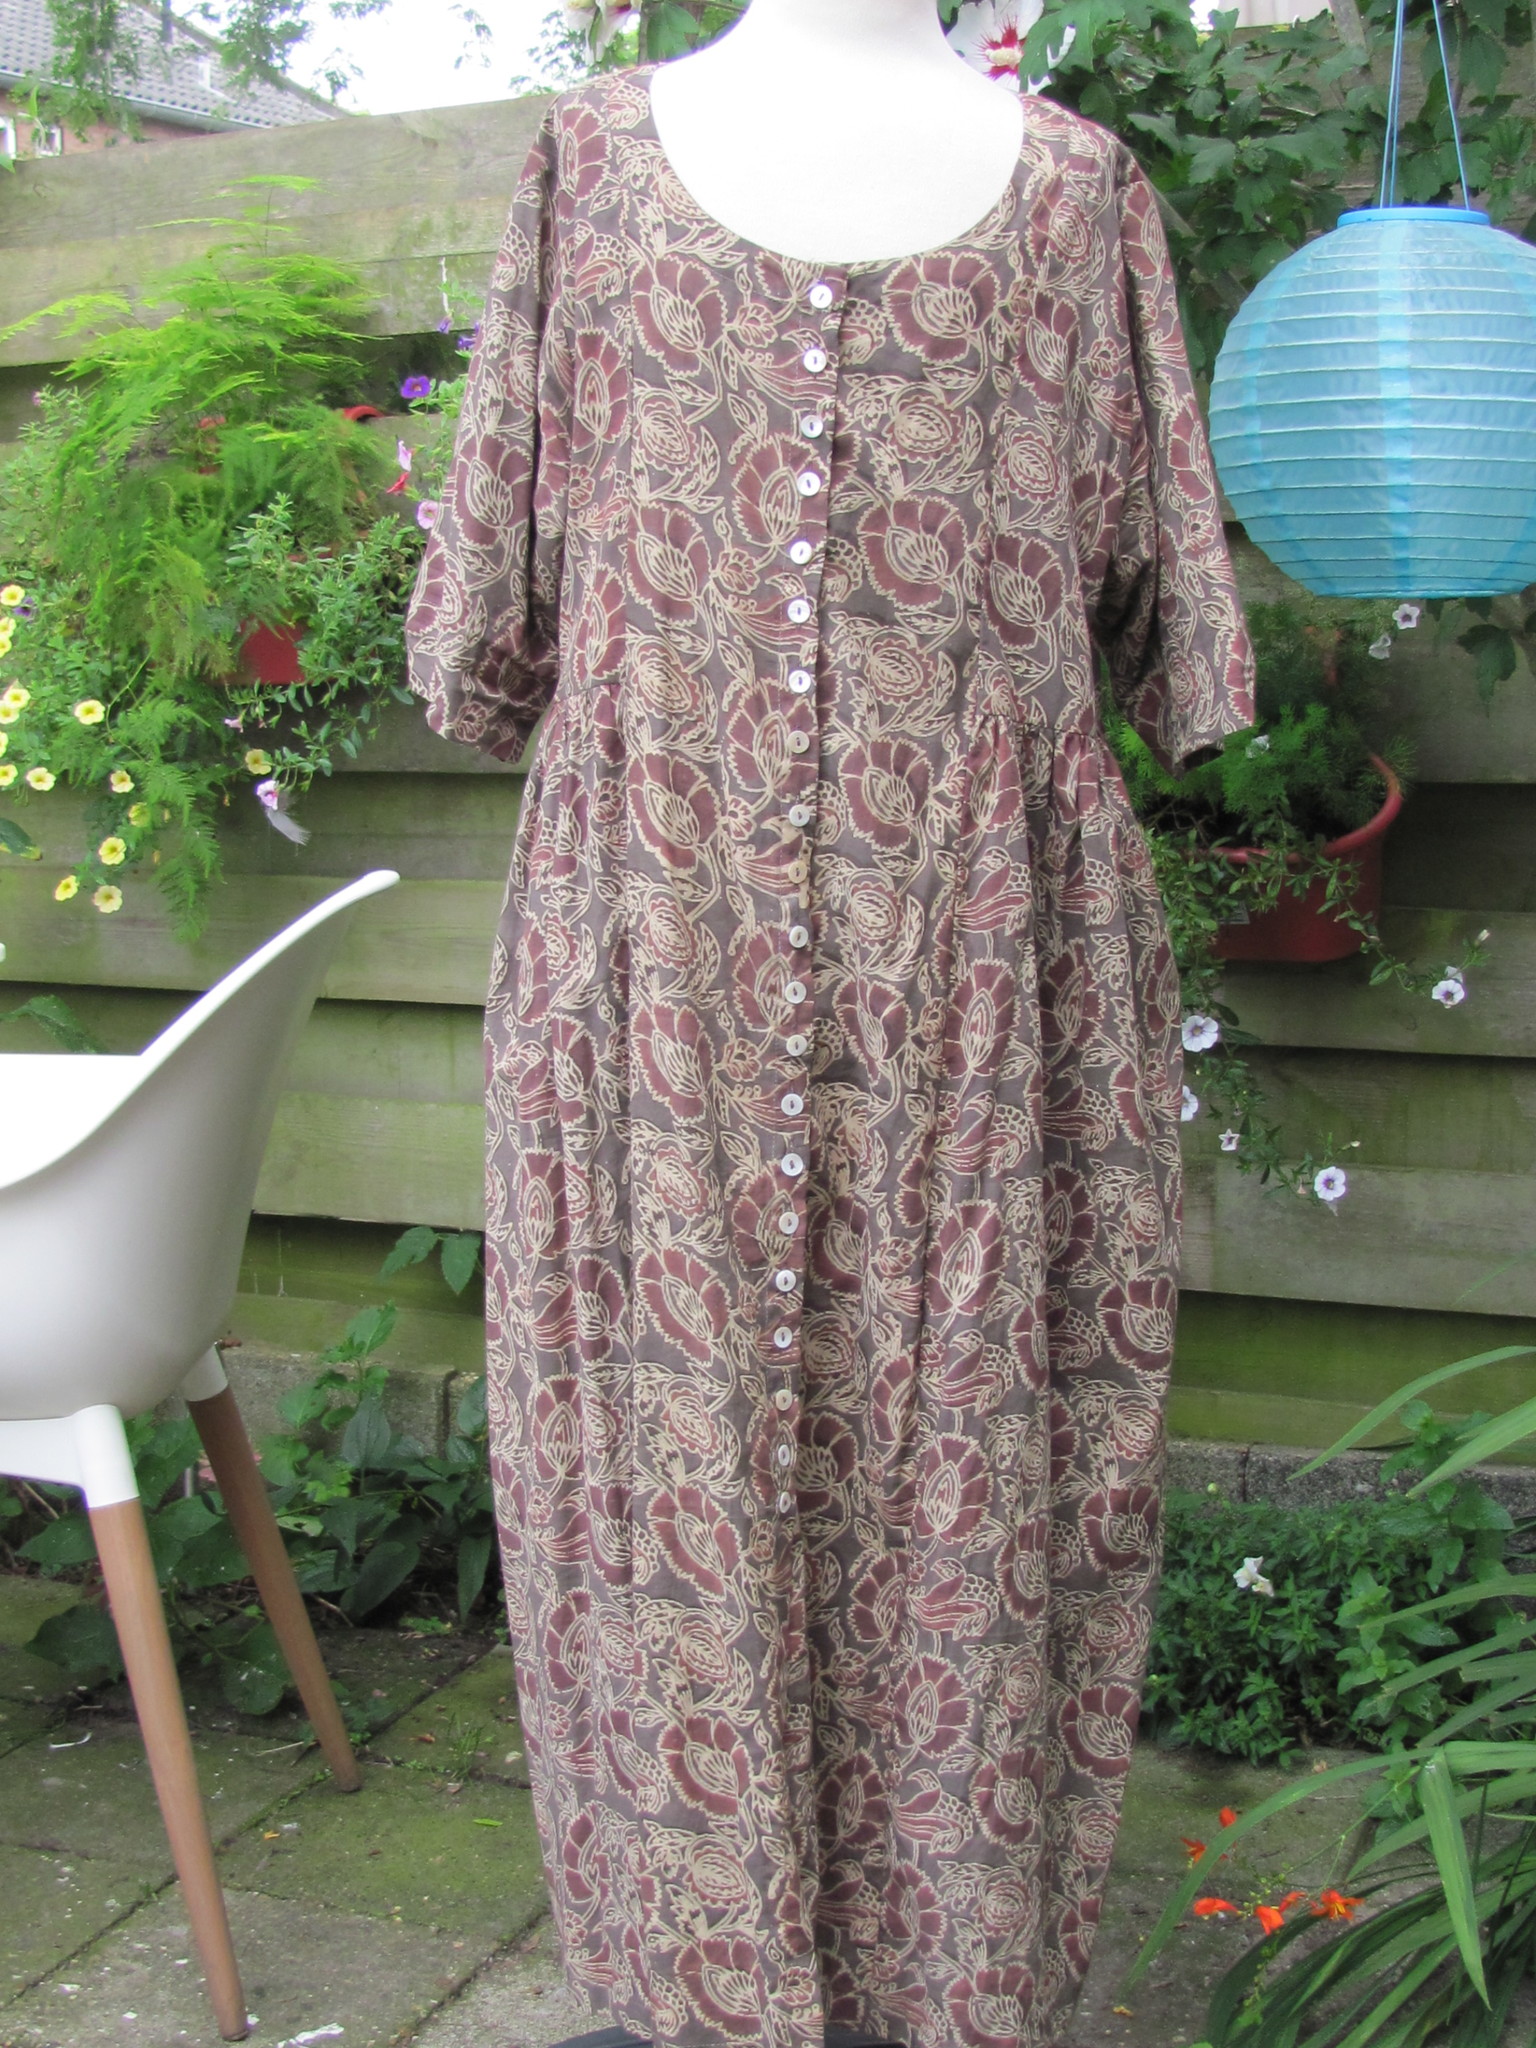 Dress fit and flare  with mother of pearl buttons